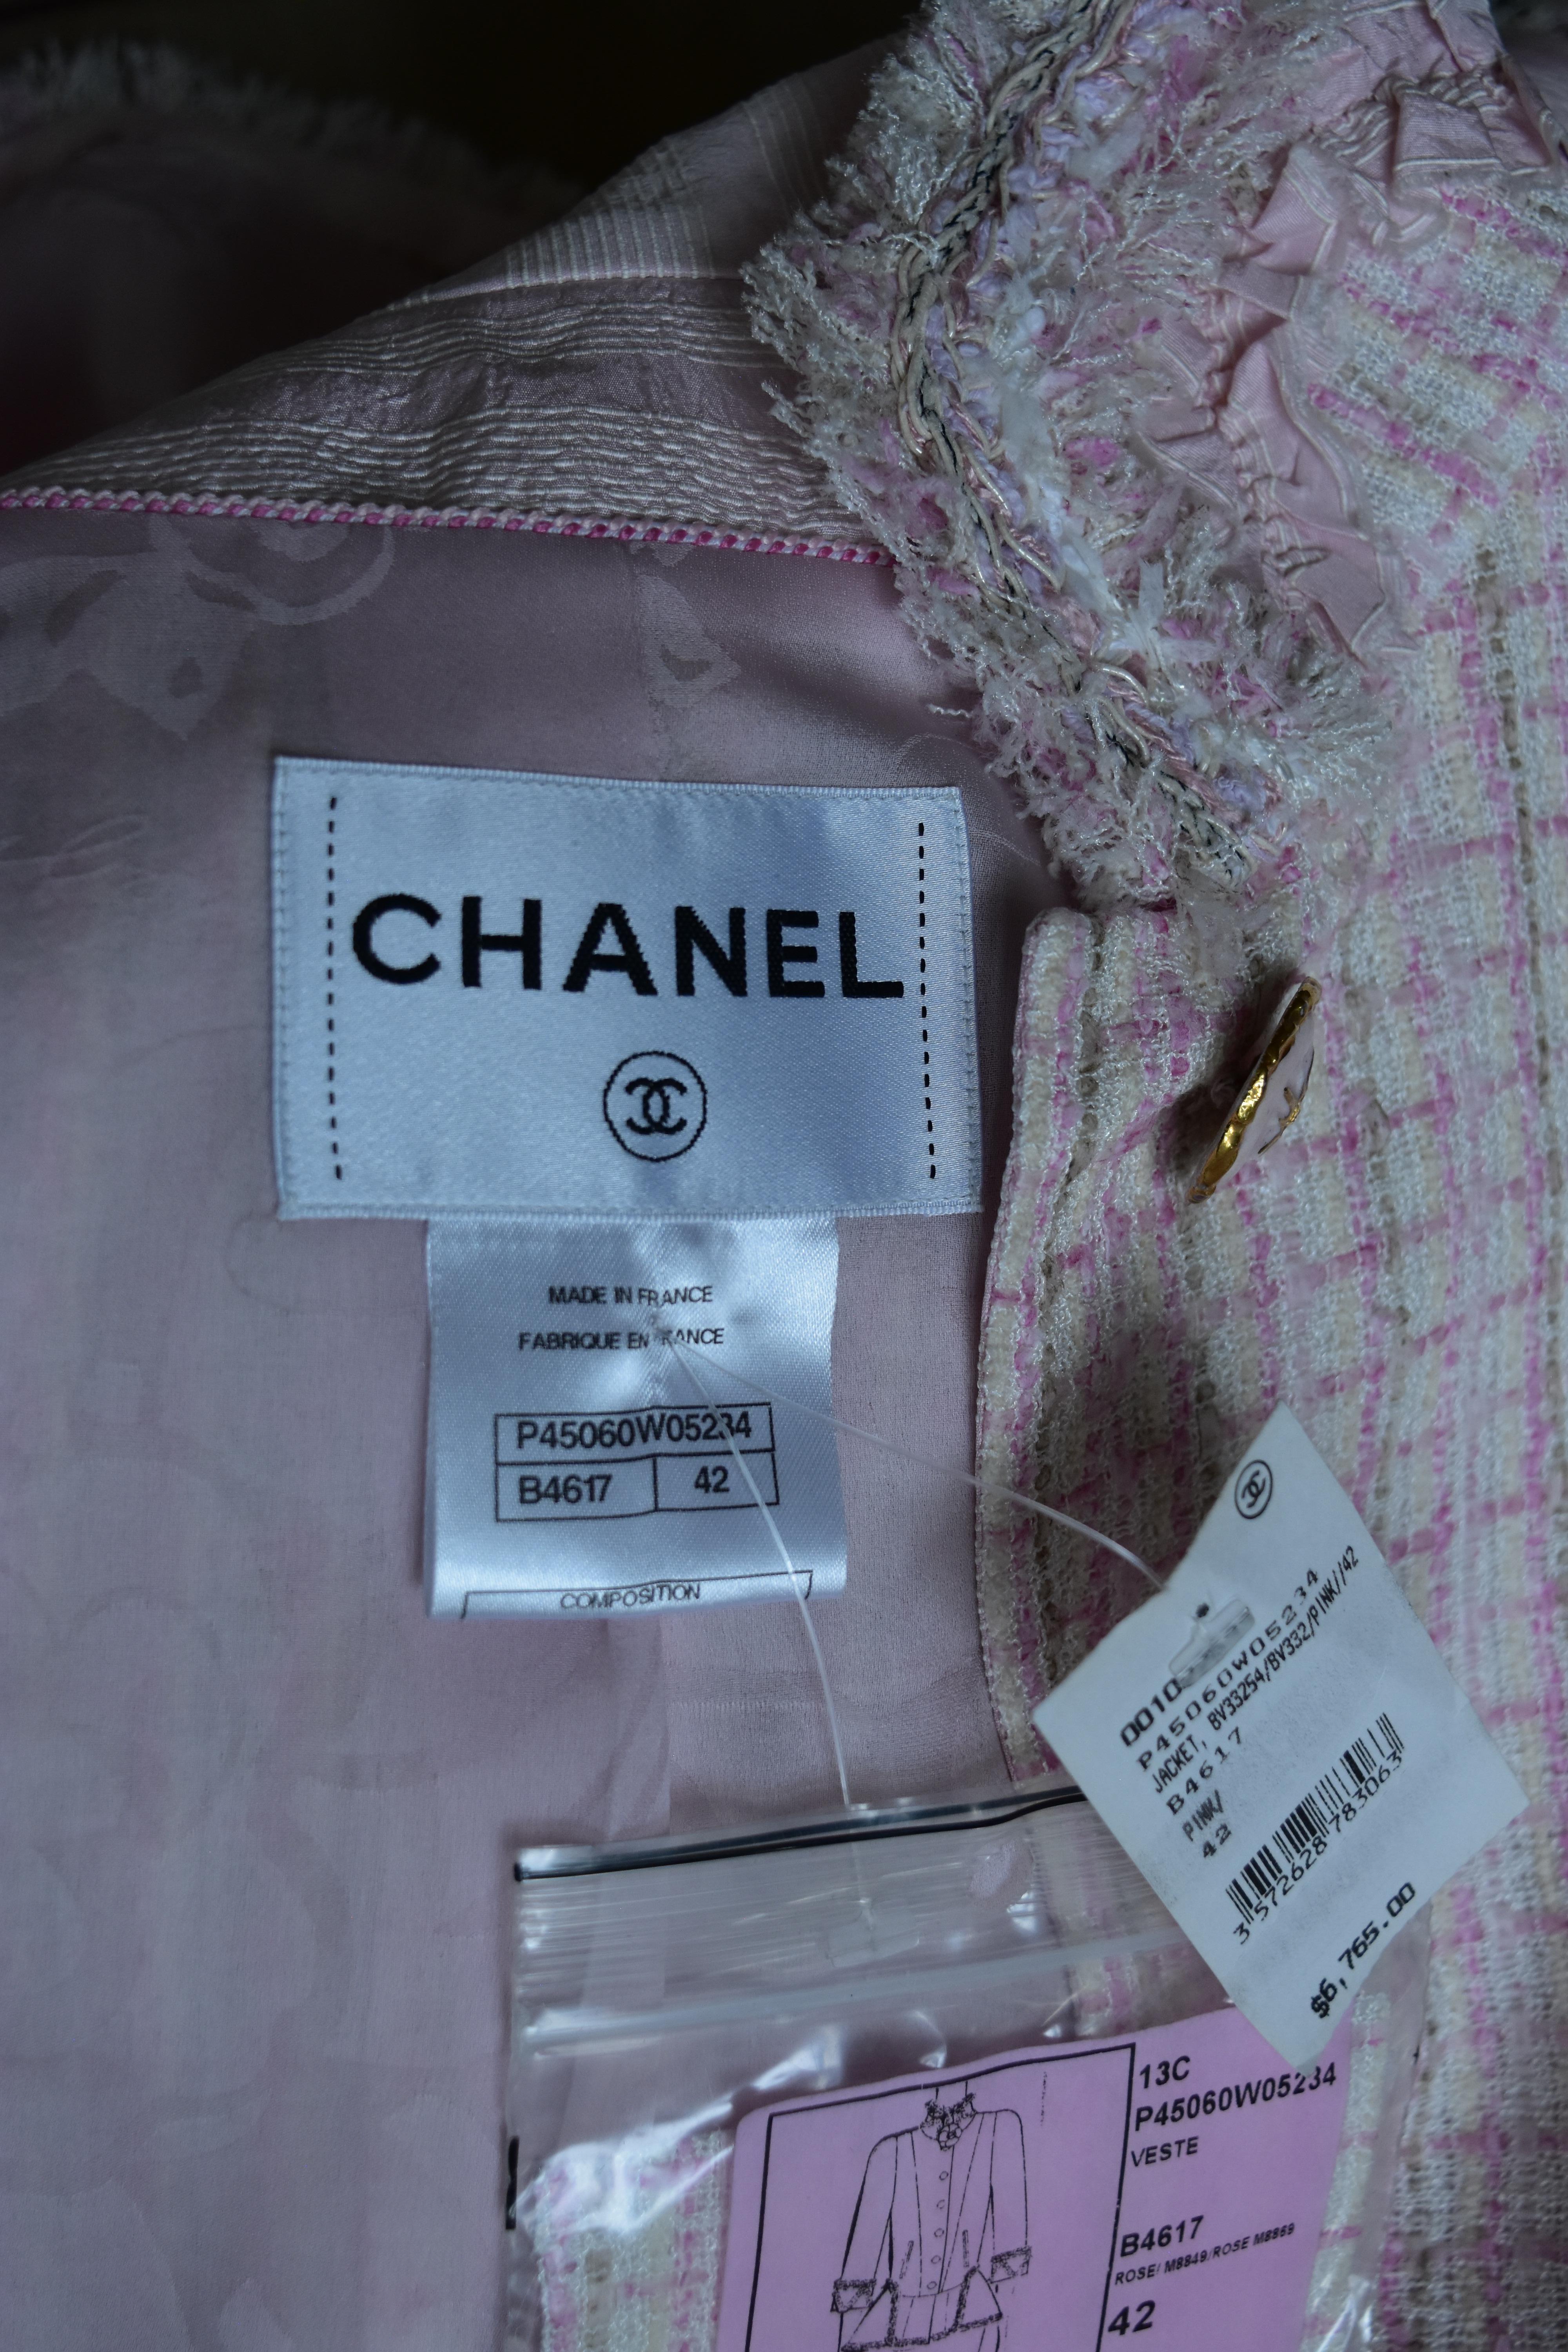 Chanel NWT 13C Cruise 2013 Runway Jacket with Brooch 42 with Fabric Swatch For Sale 2